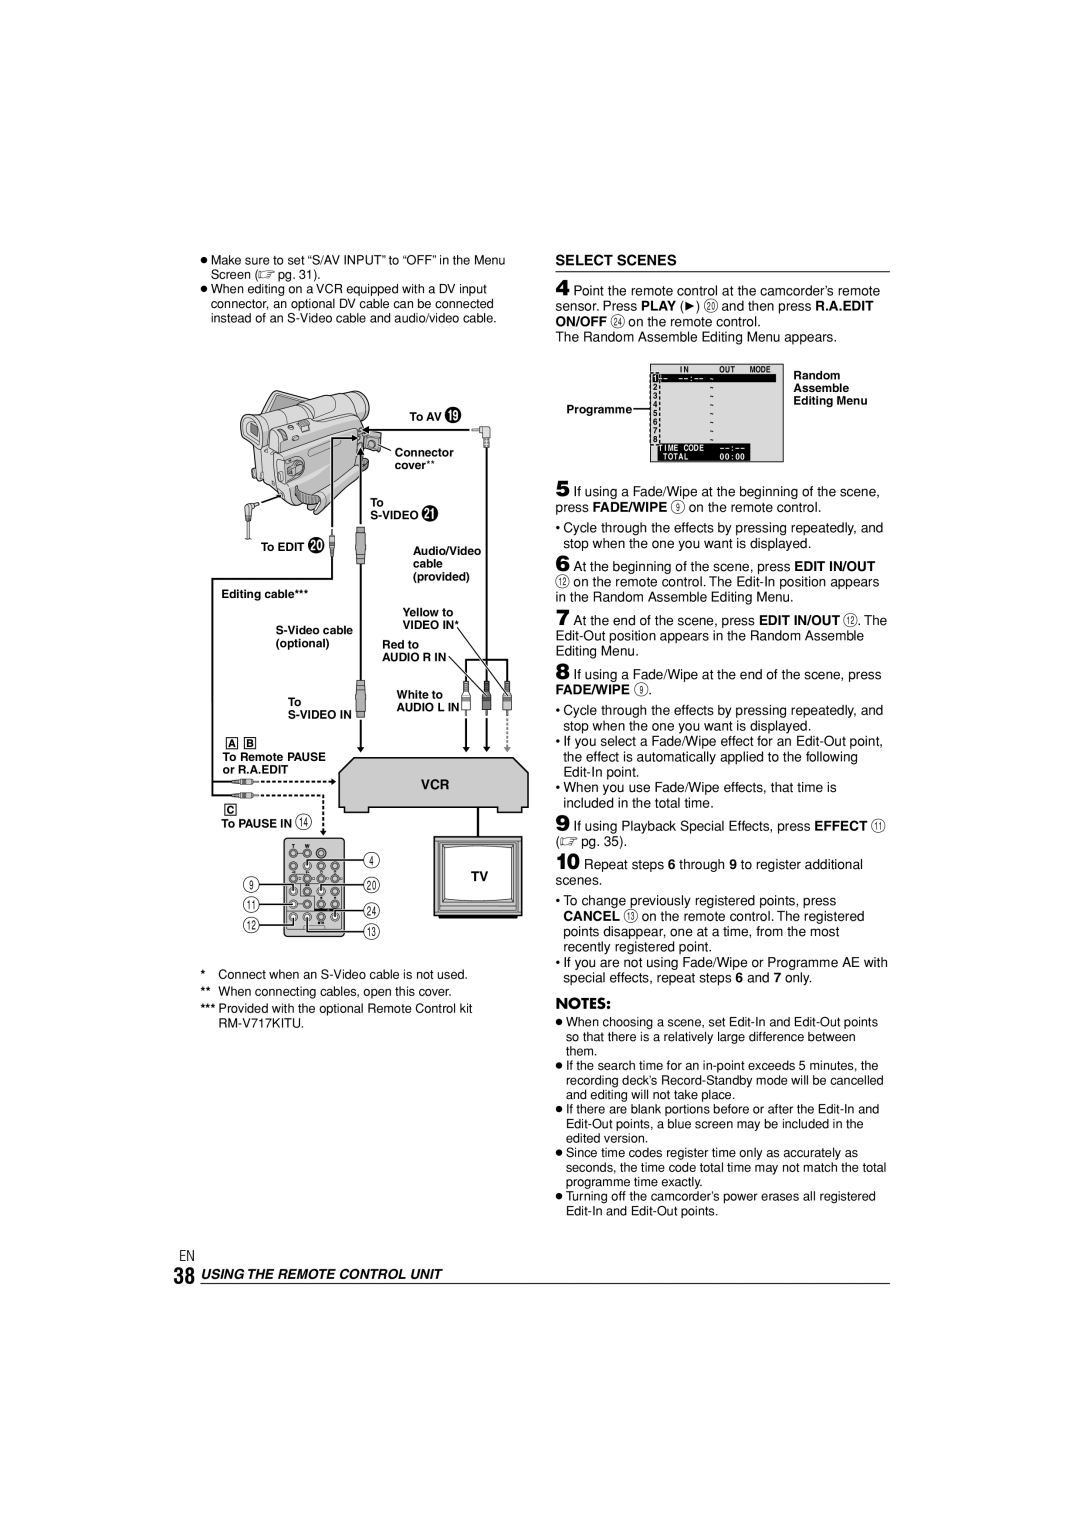 JVC GR-D90 GR-D70 instruction manual Select Scenes, If using a Fade/Wipe at the end of the scene, press FADE/WIPE 